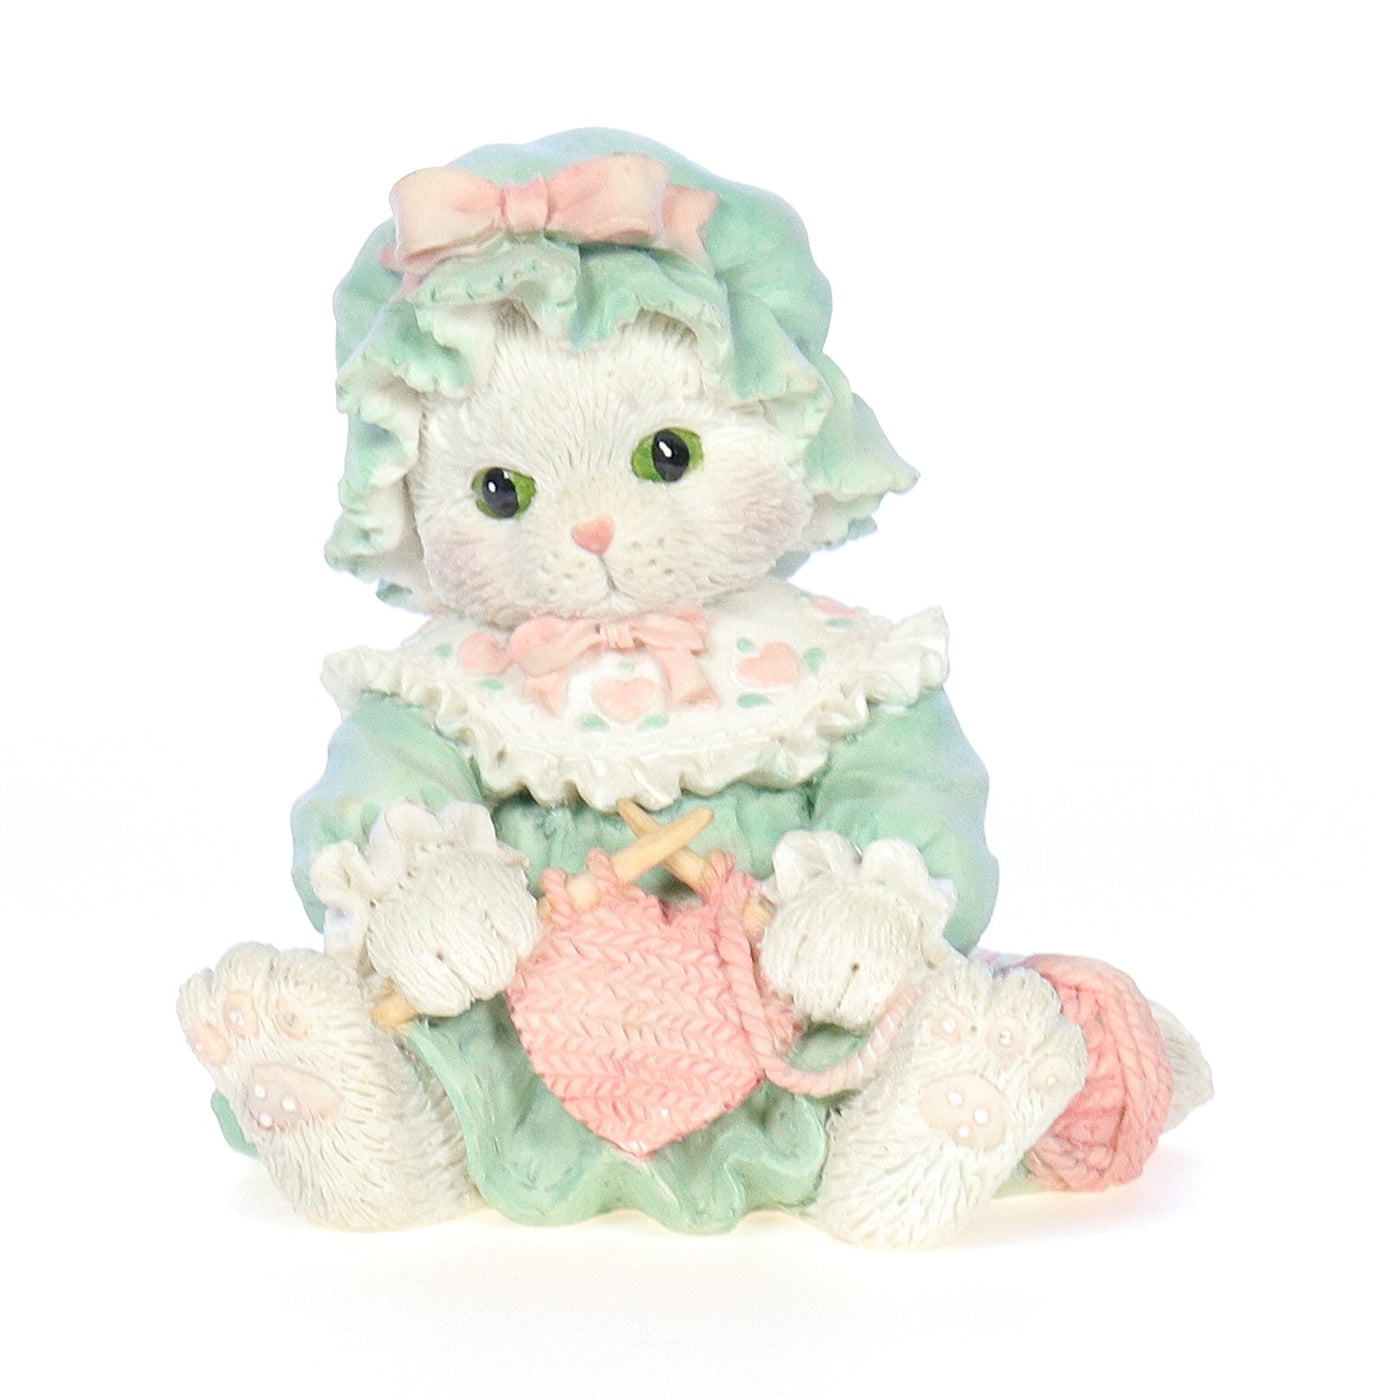 Calico_Kittens_Friendship_Mends_The_Heart_Valentines_Day_Figurine_1993